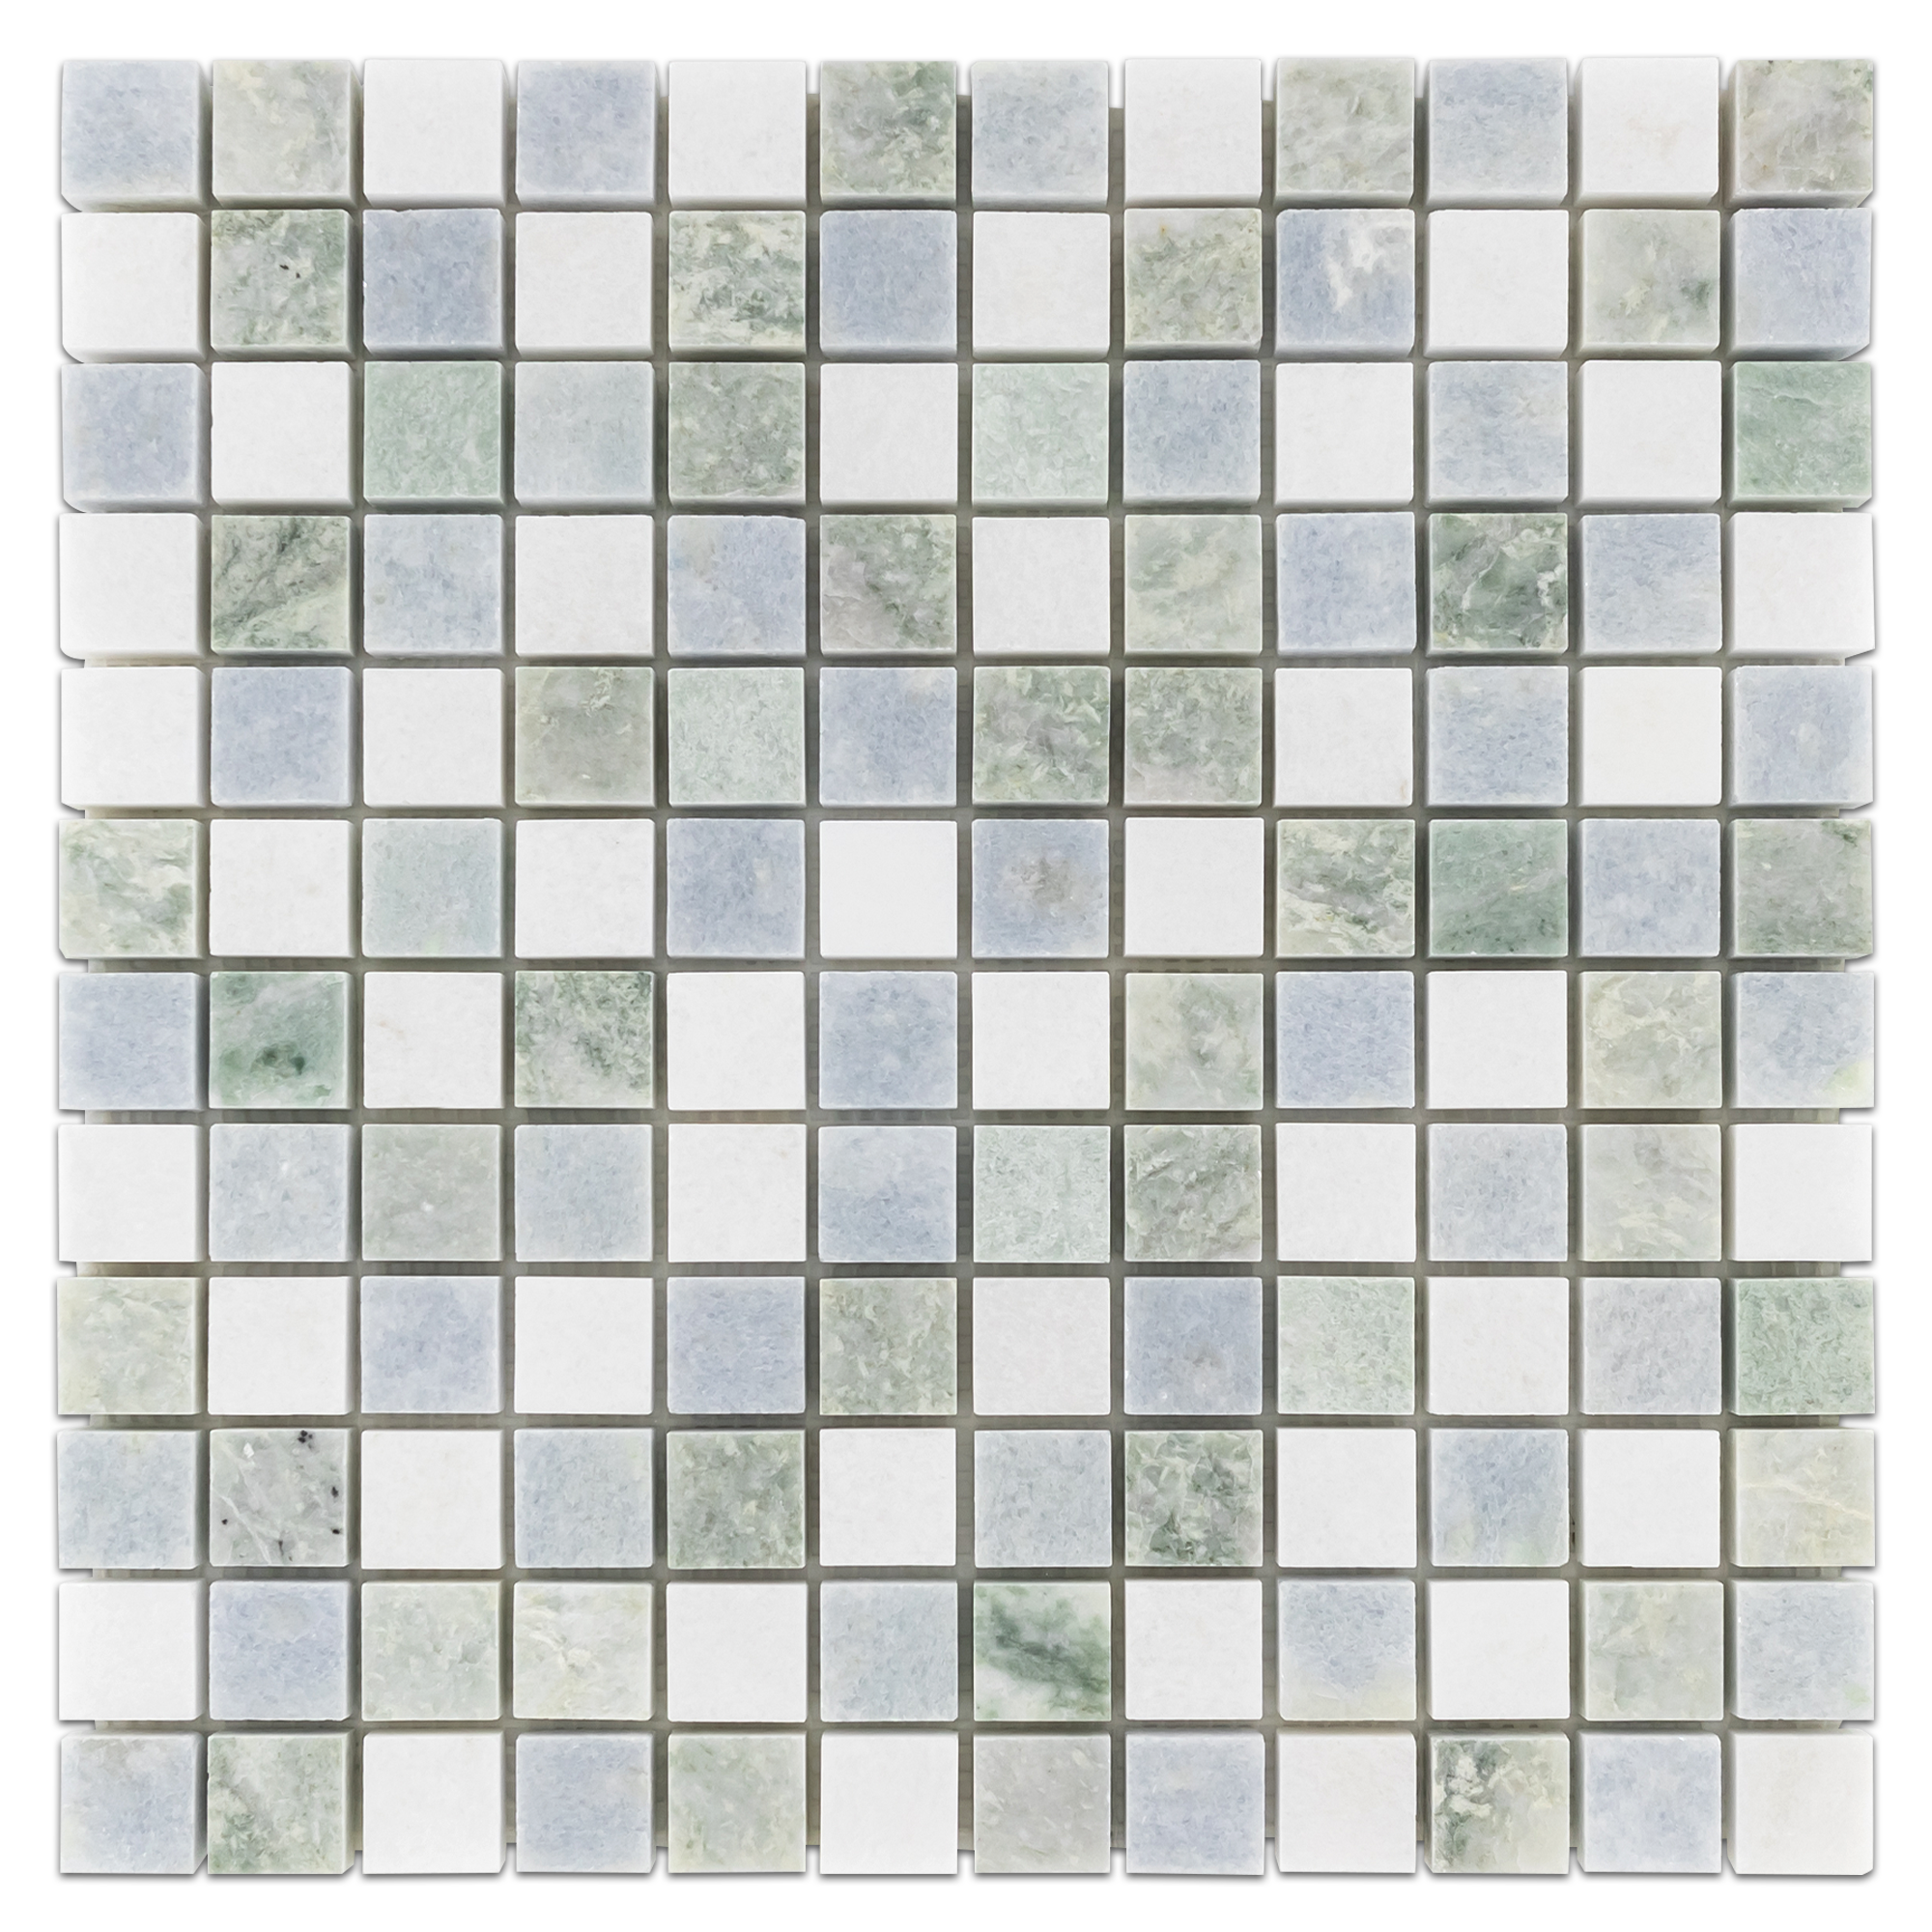 Elon Blue Celeste Ming Green White Thassos Marble Stone Blend Straight Stack Field Mosaic 12x12x0.375 Polished - Surface Group International Product